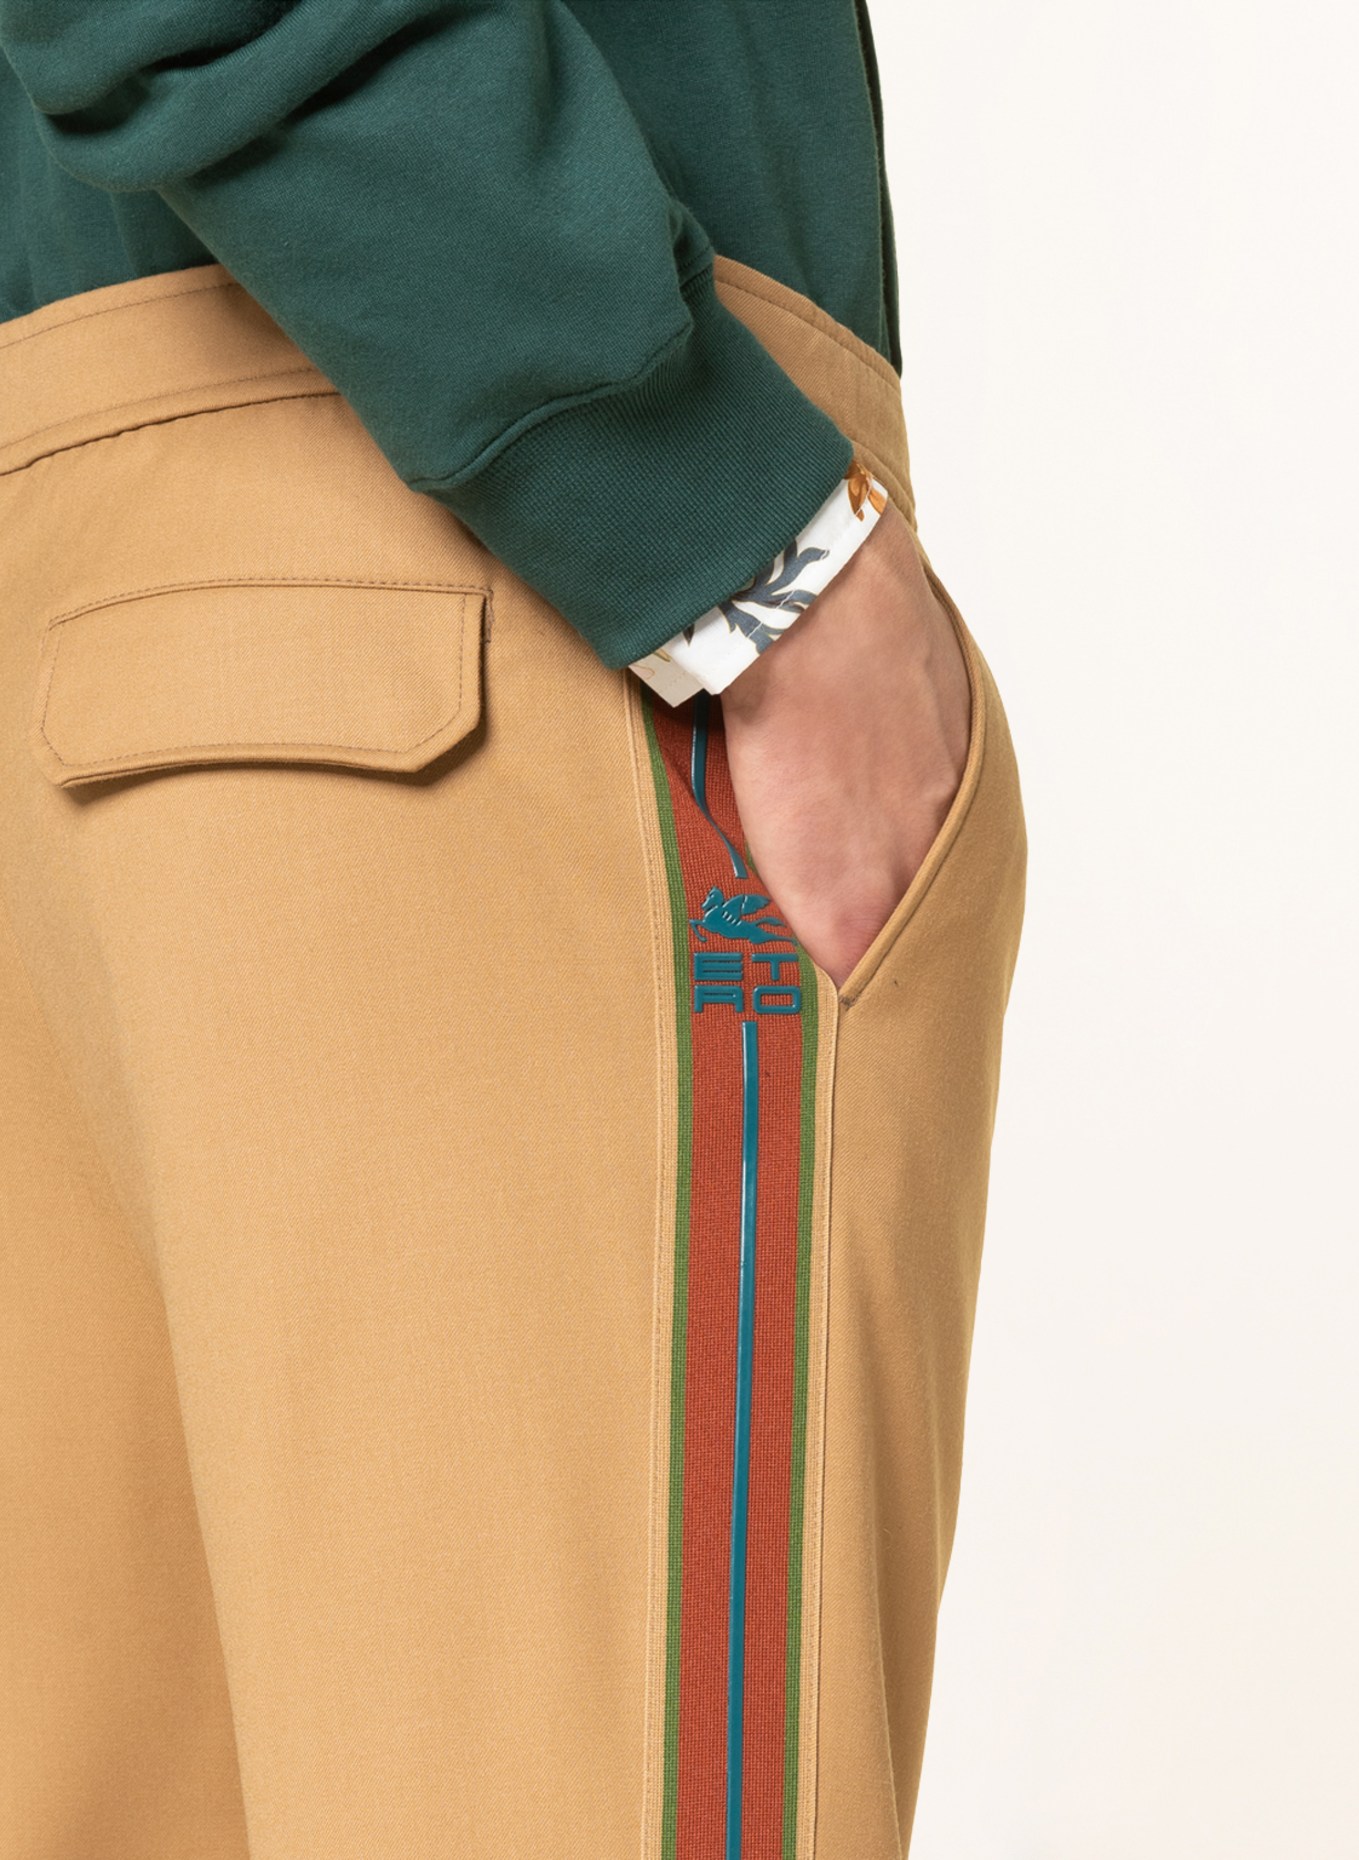 ETRO Pants in jogger style extra slim fit , Color: CAMEL (Image 5)